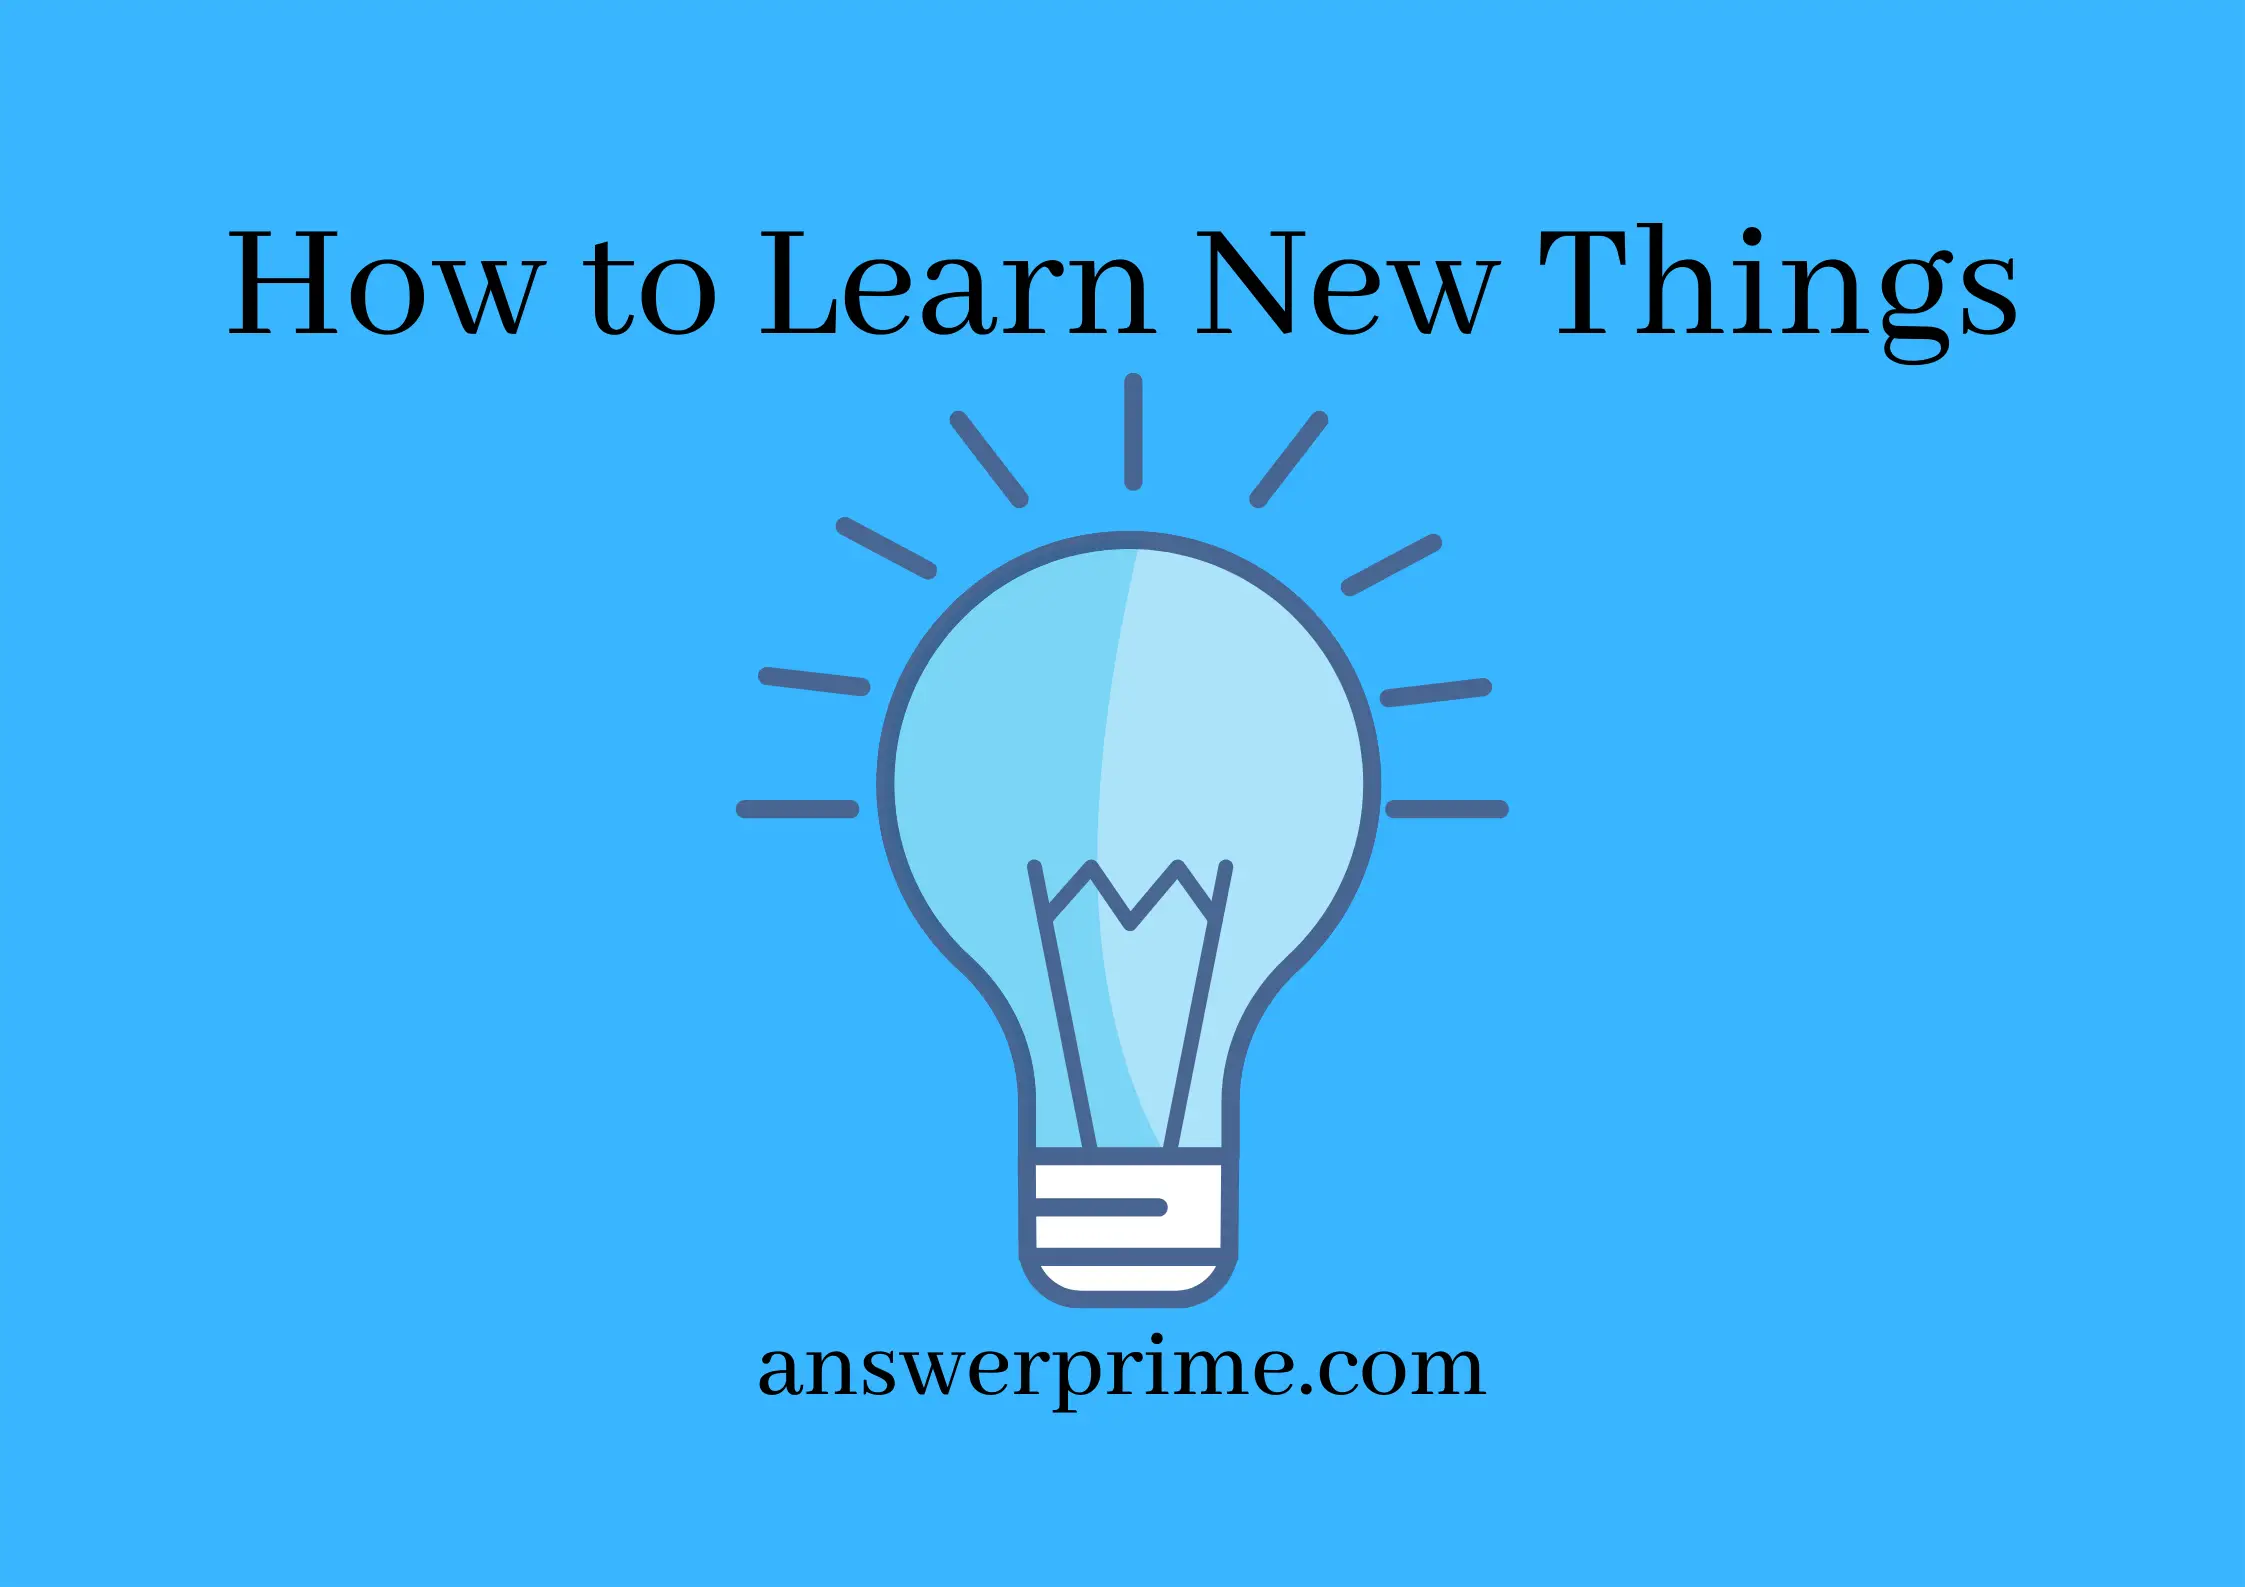 How to Learn New Things